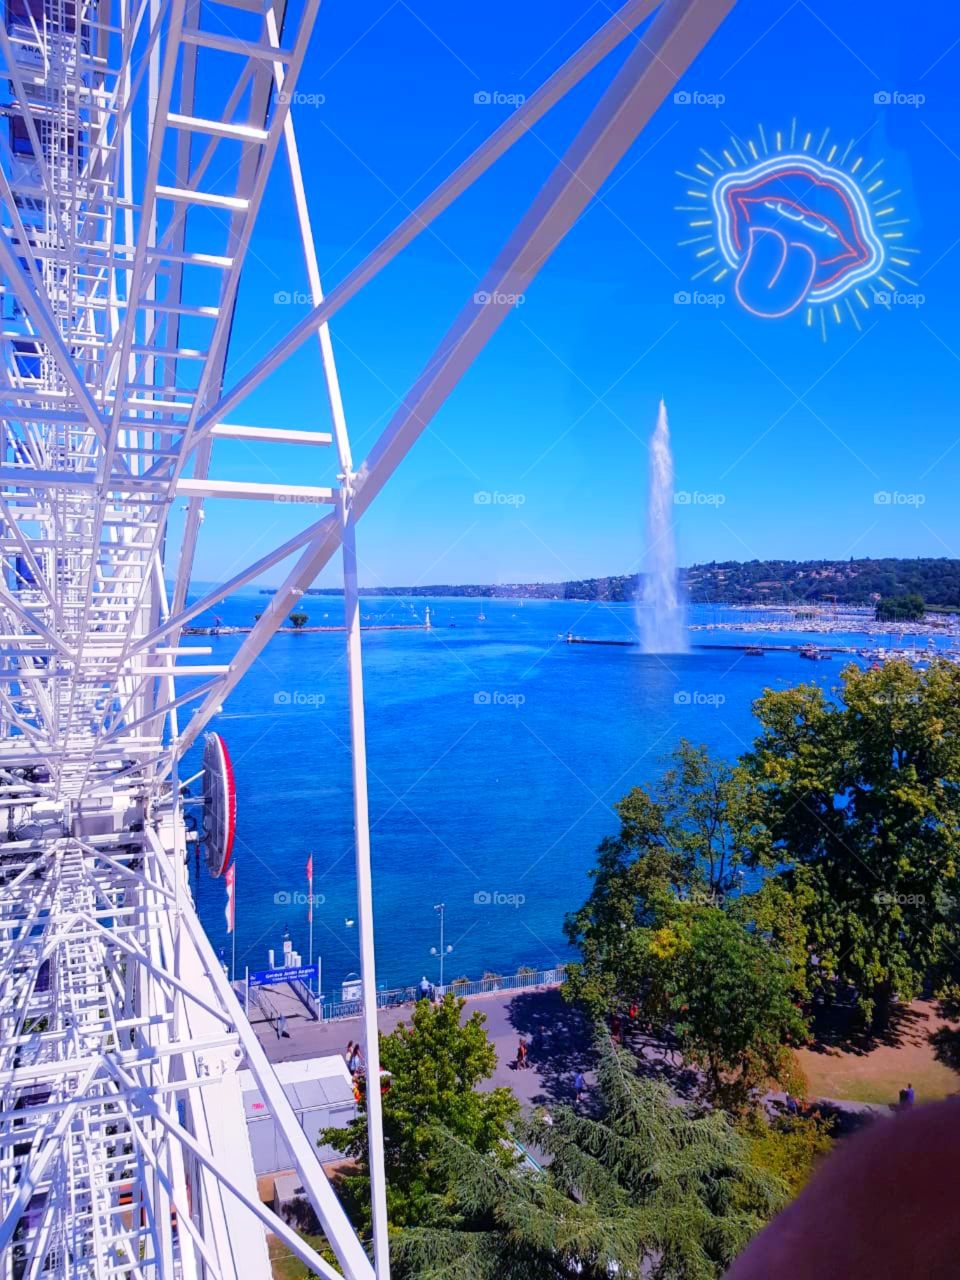 Blue prevails...Unlucky geyser...
Terrifying rollercoaster😭🤣
For long as I have blue lake😄😄 never wanna get in that "blue sky"🤤🤤....